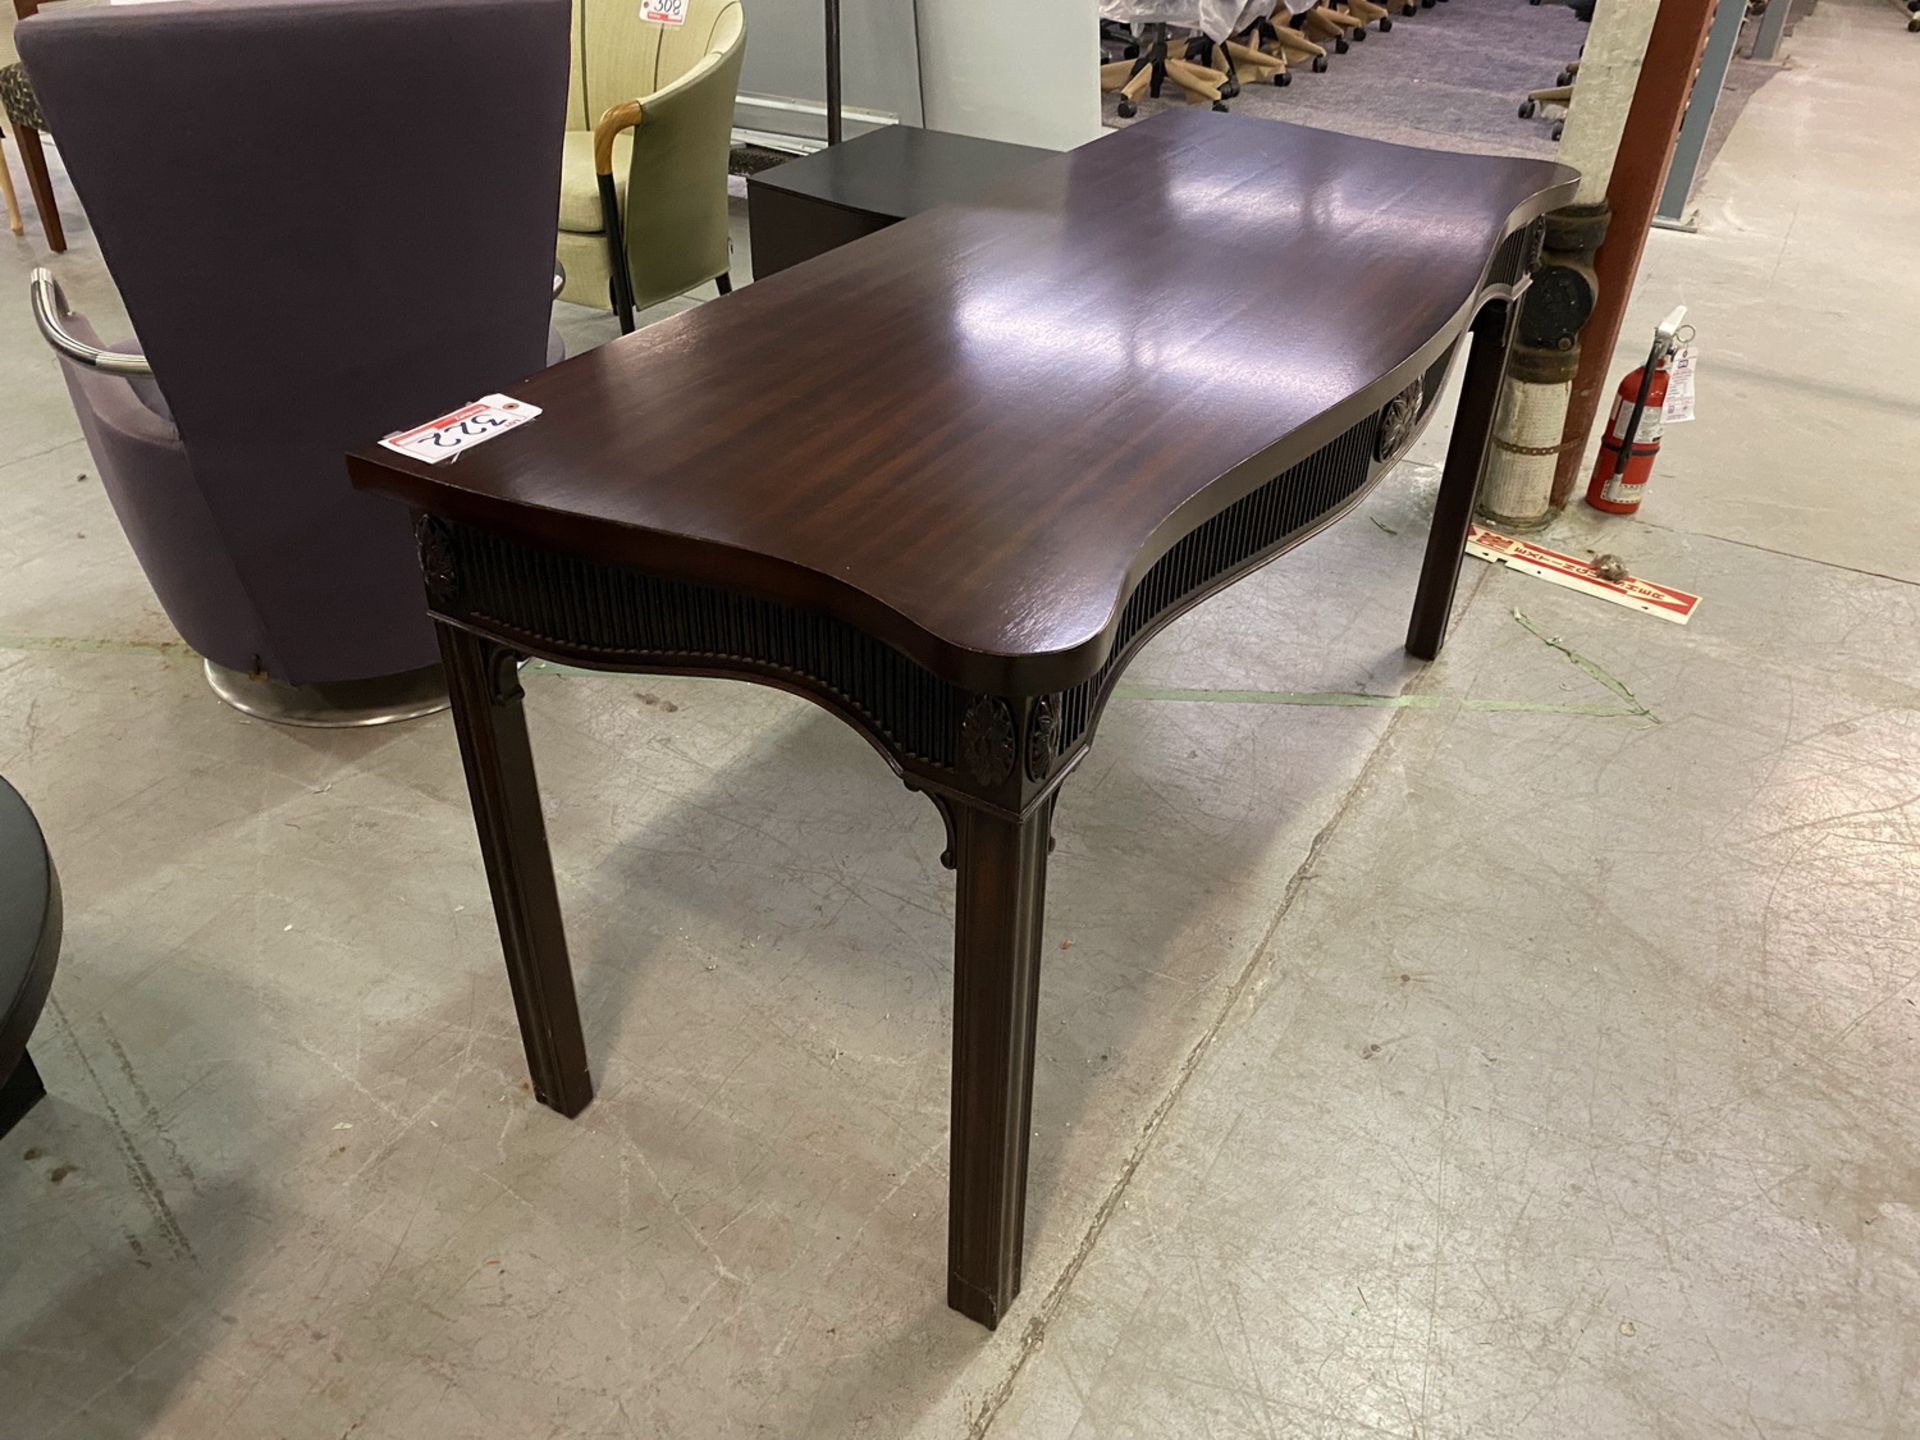 GIORGETTI MAHOGANY 26 X 64.5 X 32.5" TABLE (SCRATCHES ON TOP) - Image 2 of 2